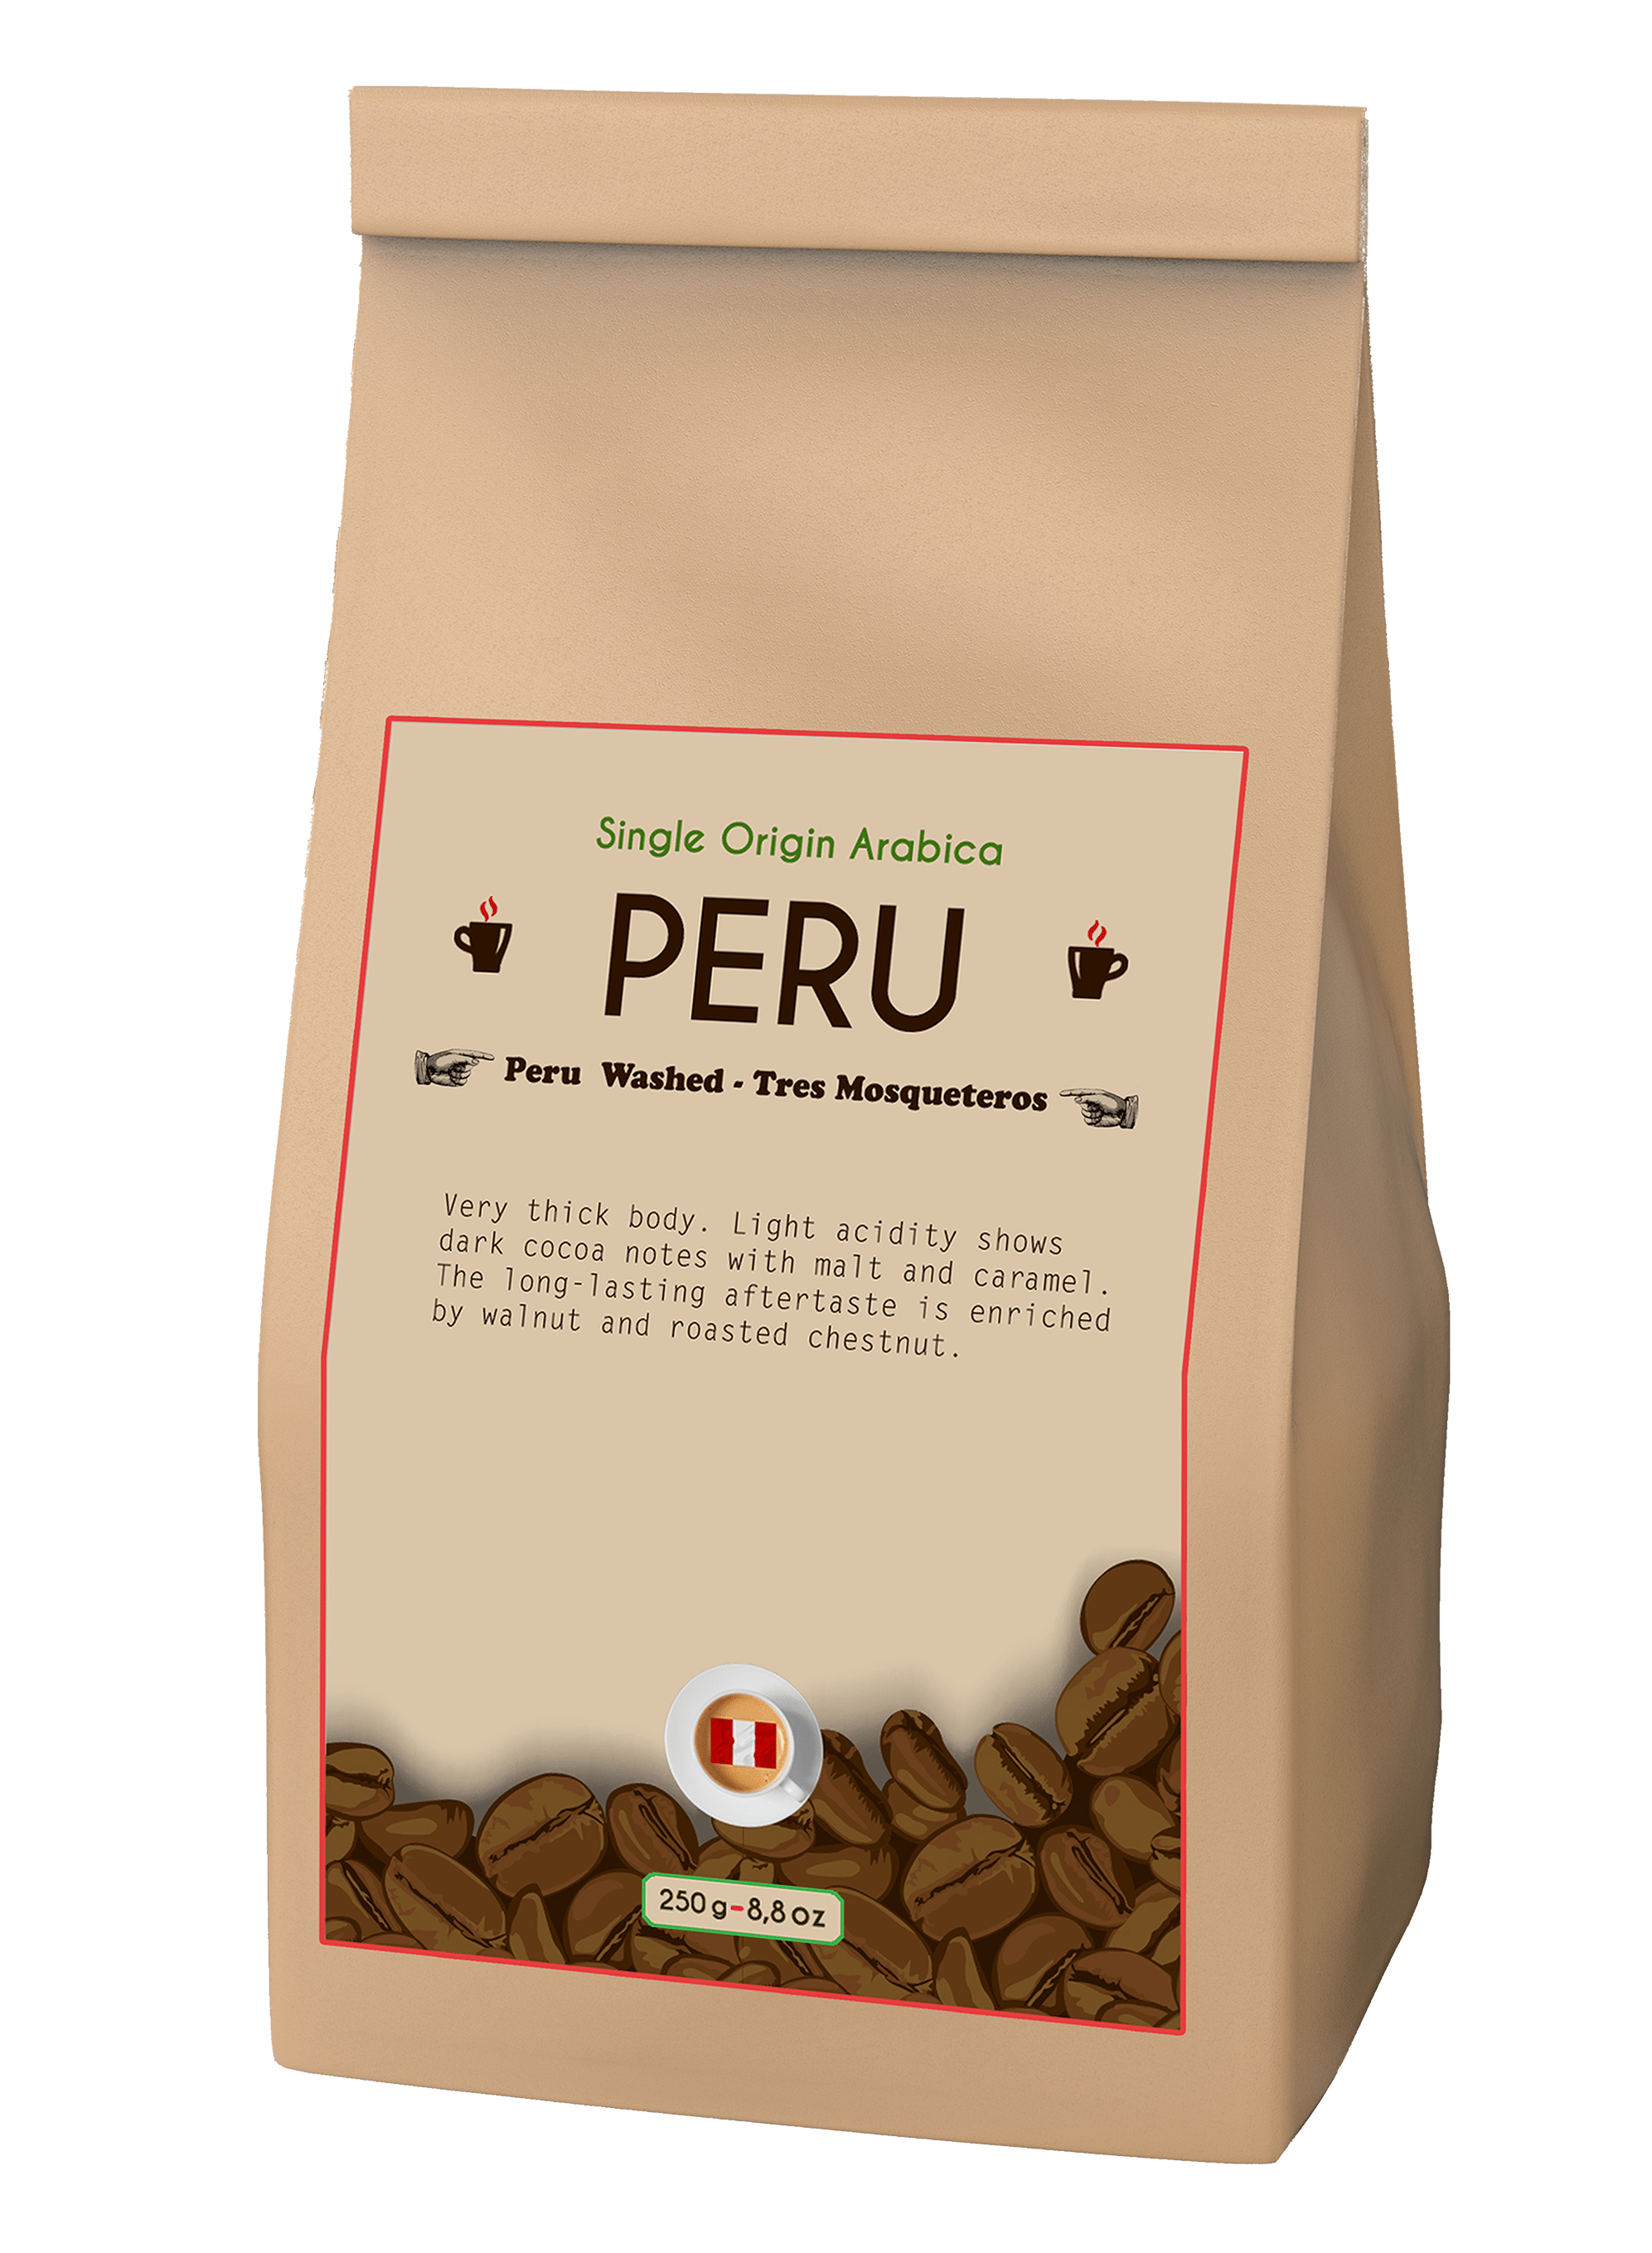 Single origin png - PERÙ WASHED TRES MOSQUETEROS